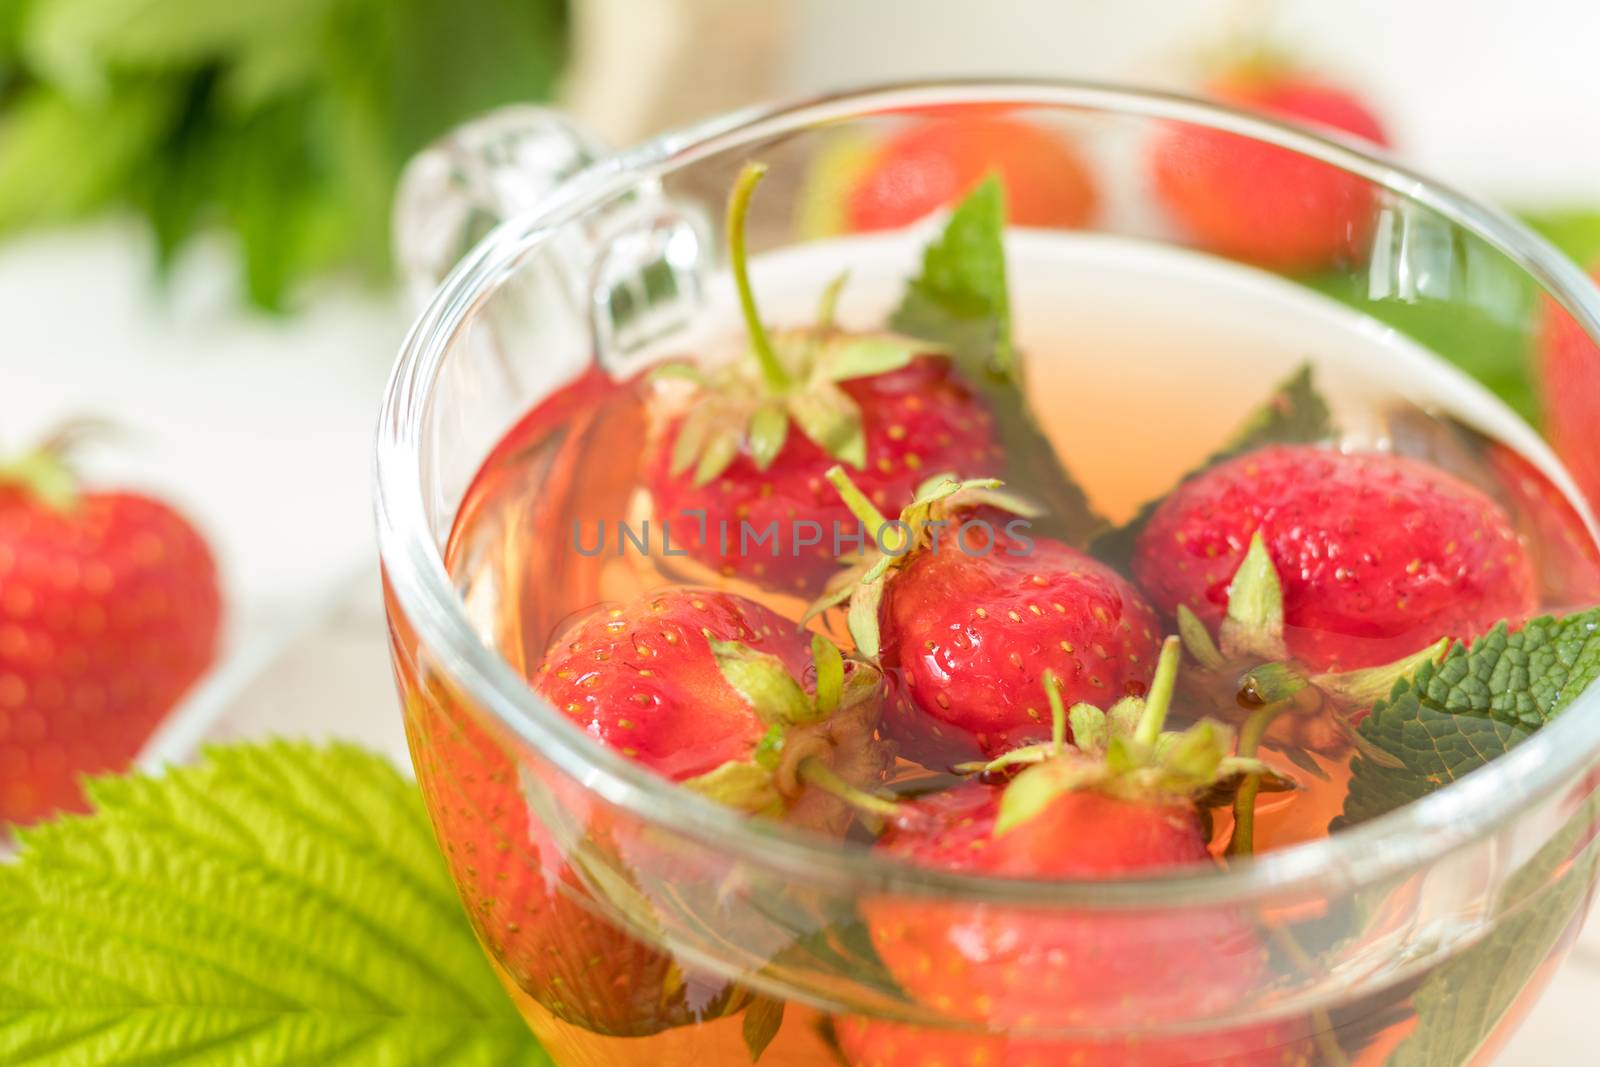 Glass cup of summer tea with fresh strawberry. Green leaves. Fresh mint. White wooden table. Shallow depth of field.